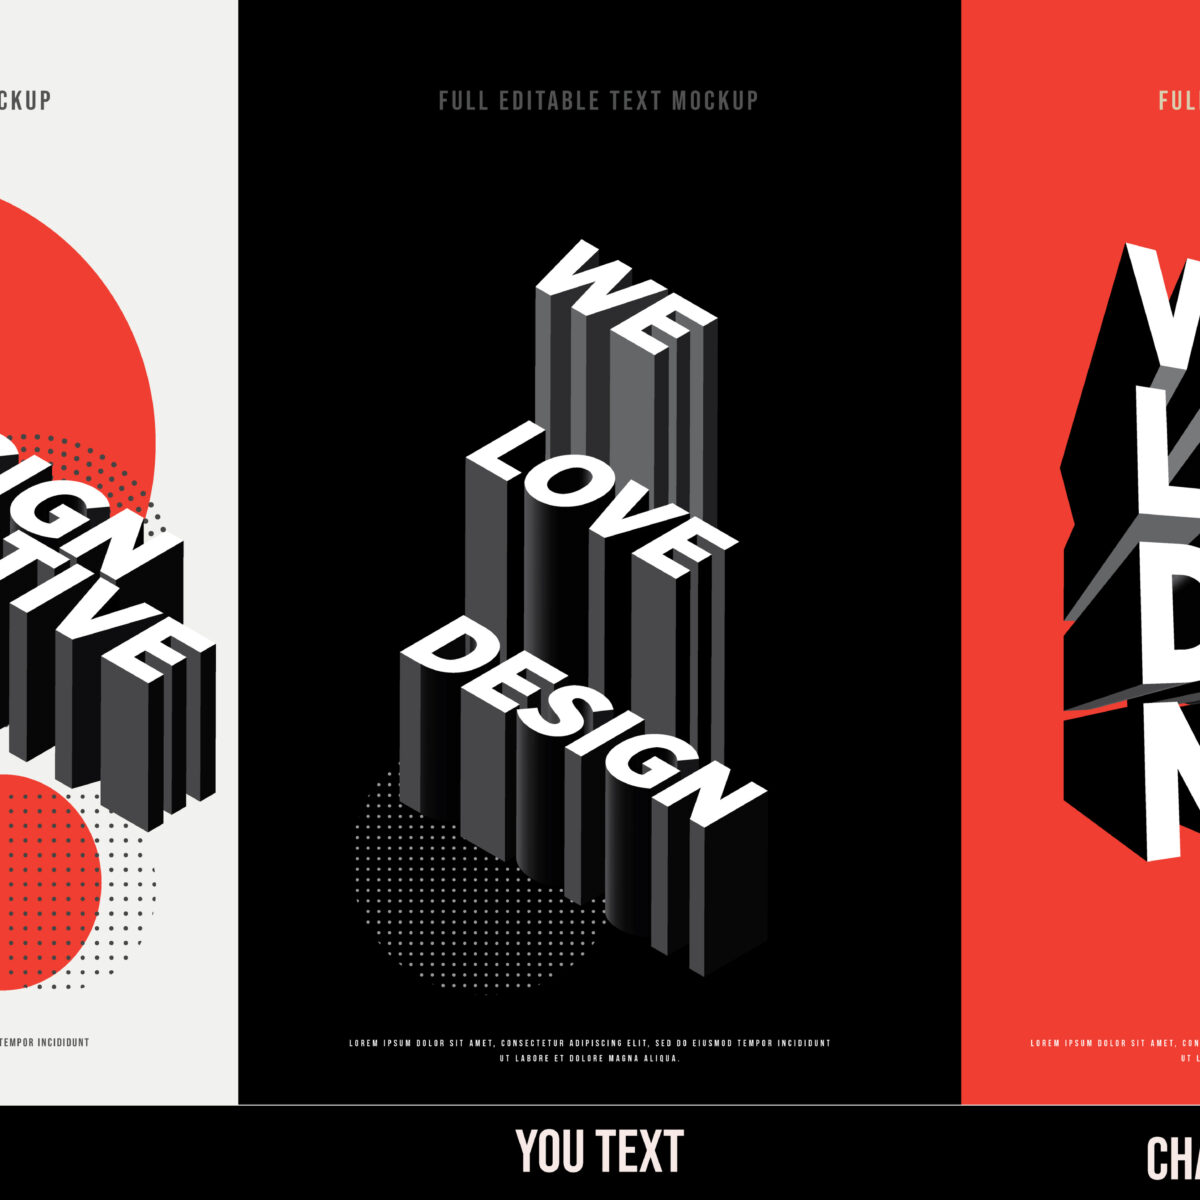 image containing 3 examples of typography